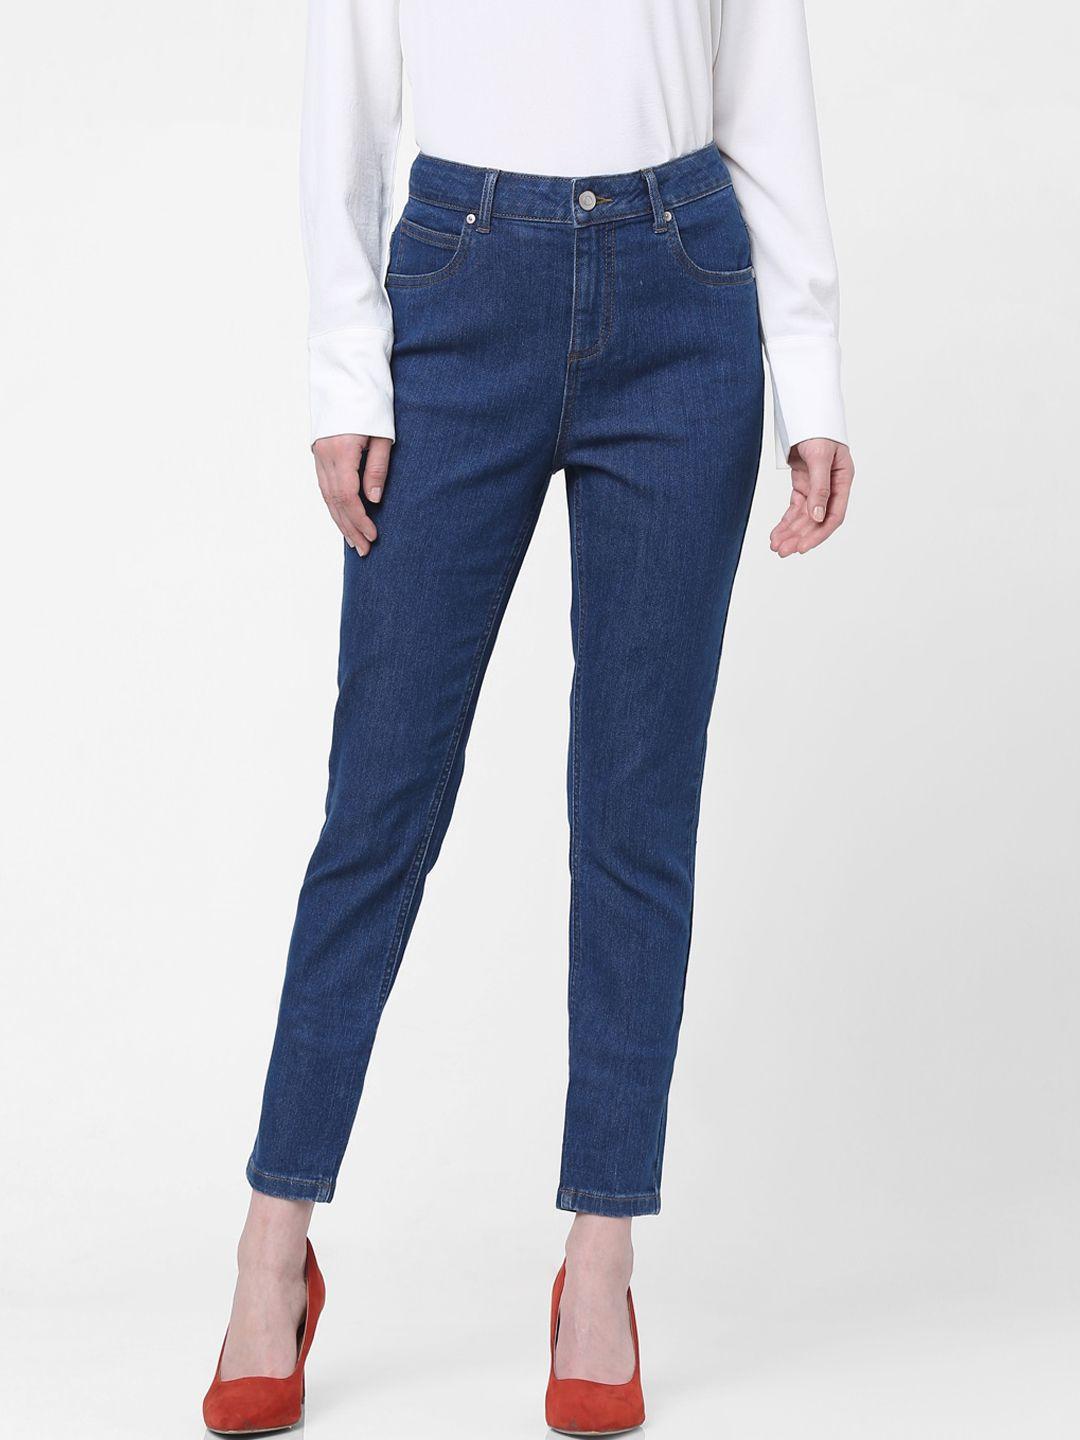 Vero Moda Women Blue Skinny Fit High-Rise Stretchable Jeans